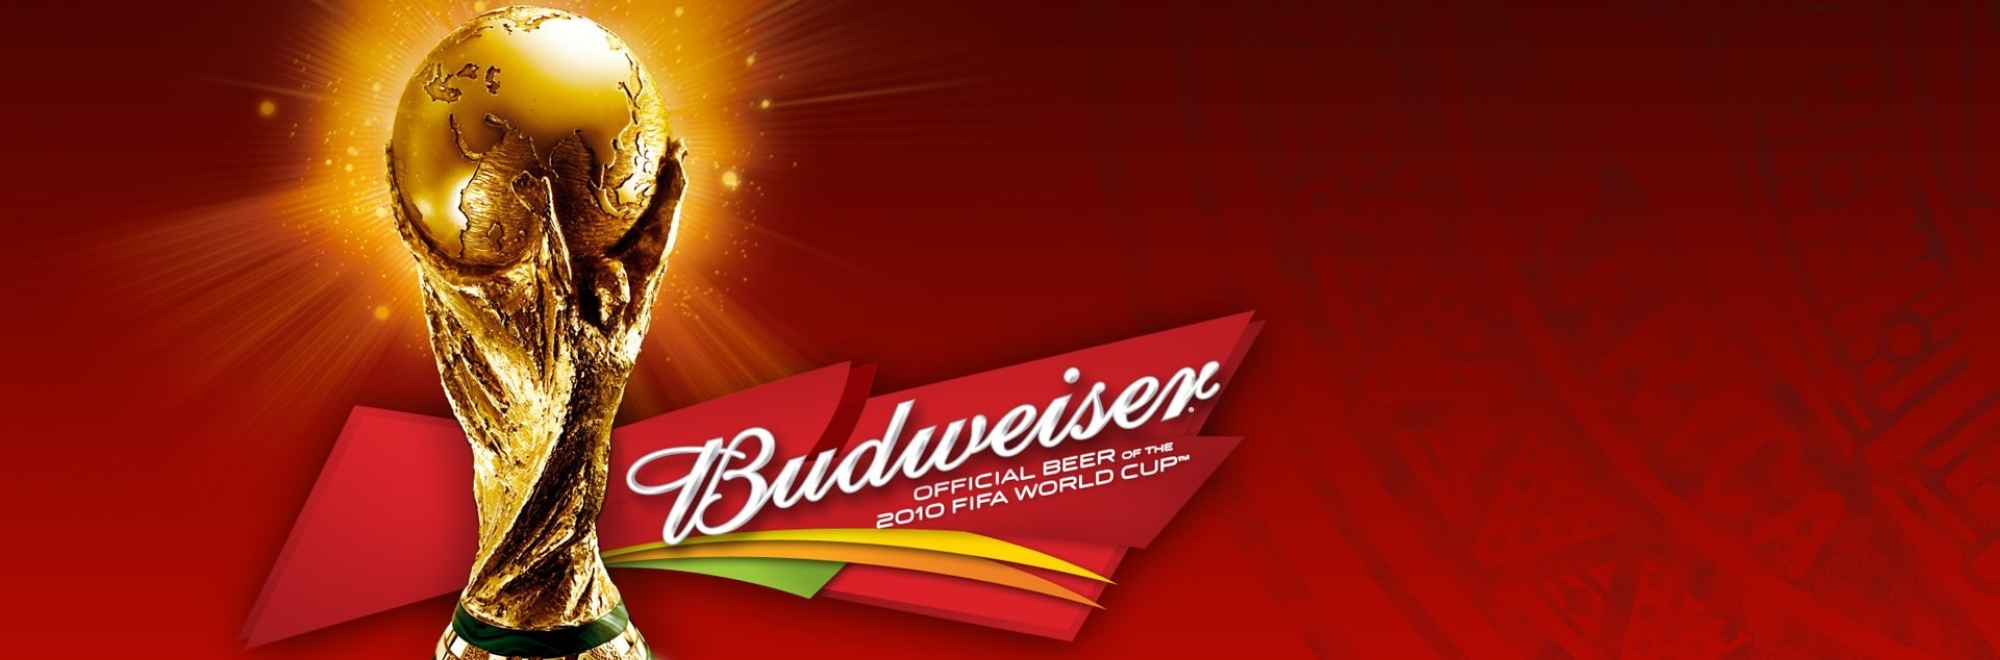 How Bud invaded the World Cup